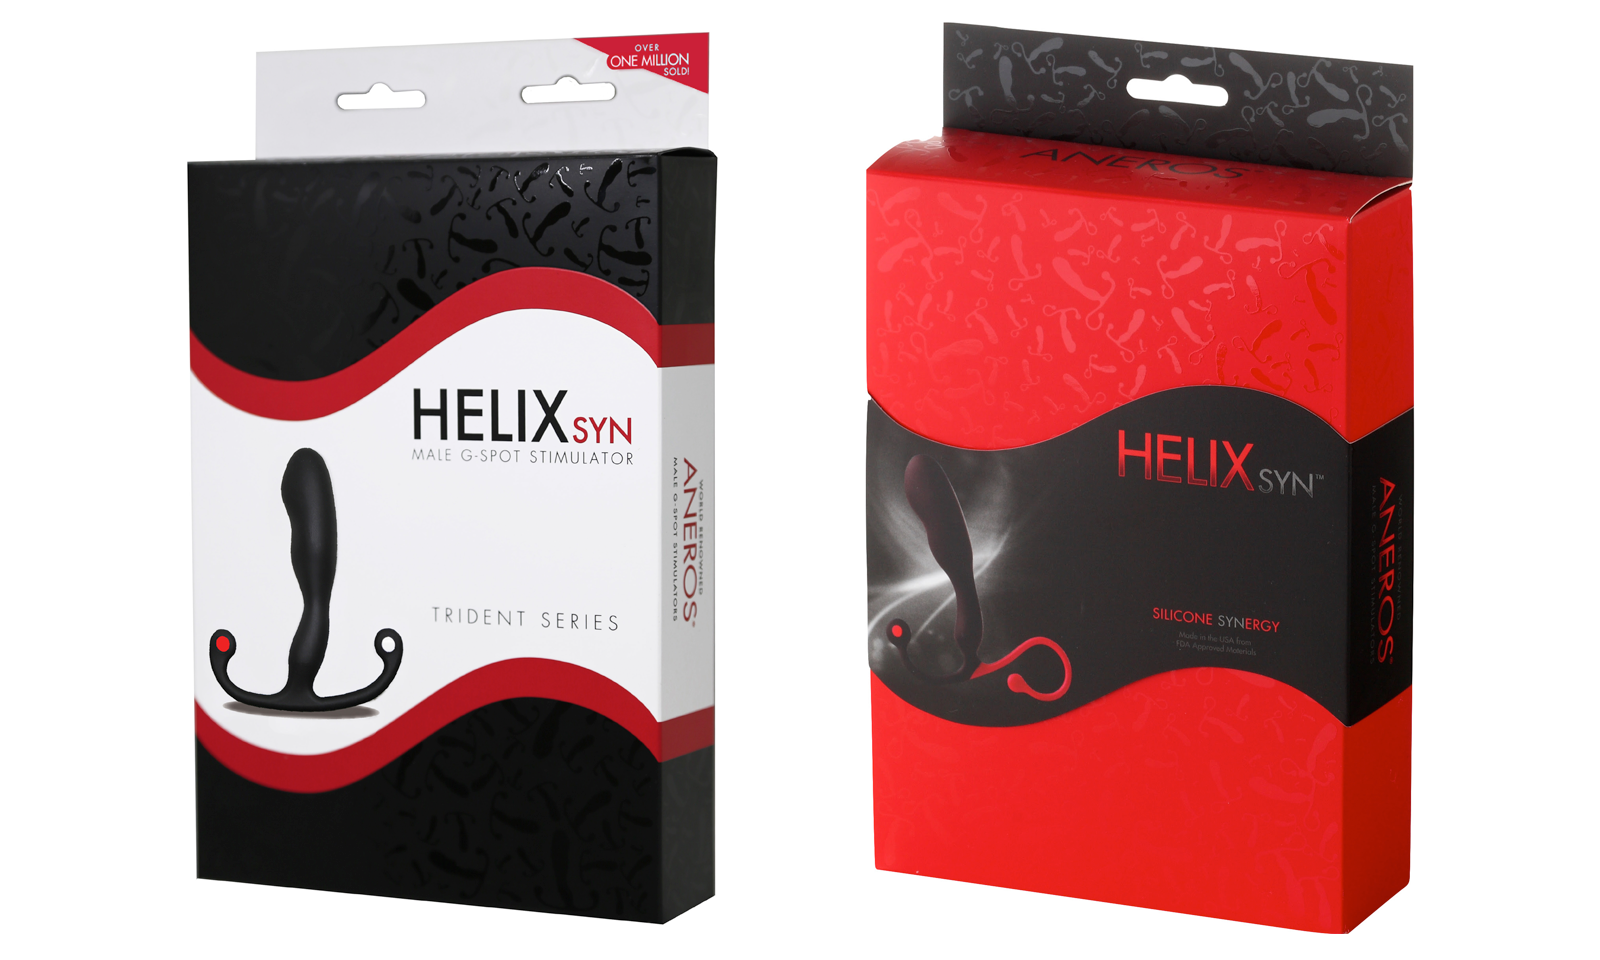 Helix Syn Trident Replacing Best Selling Helix Syn from Aneros